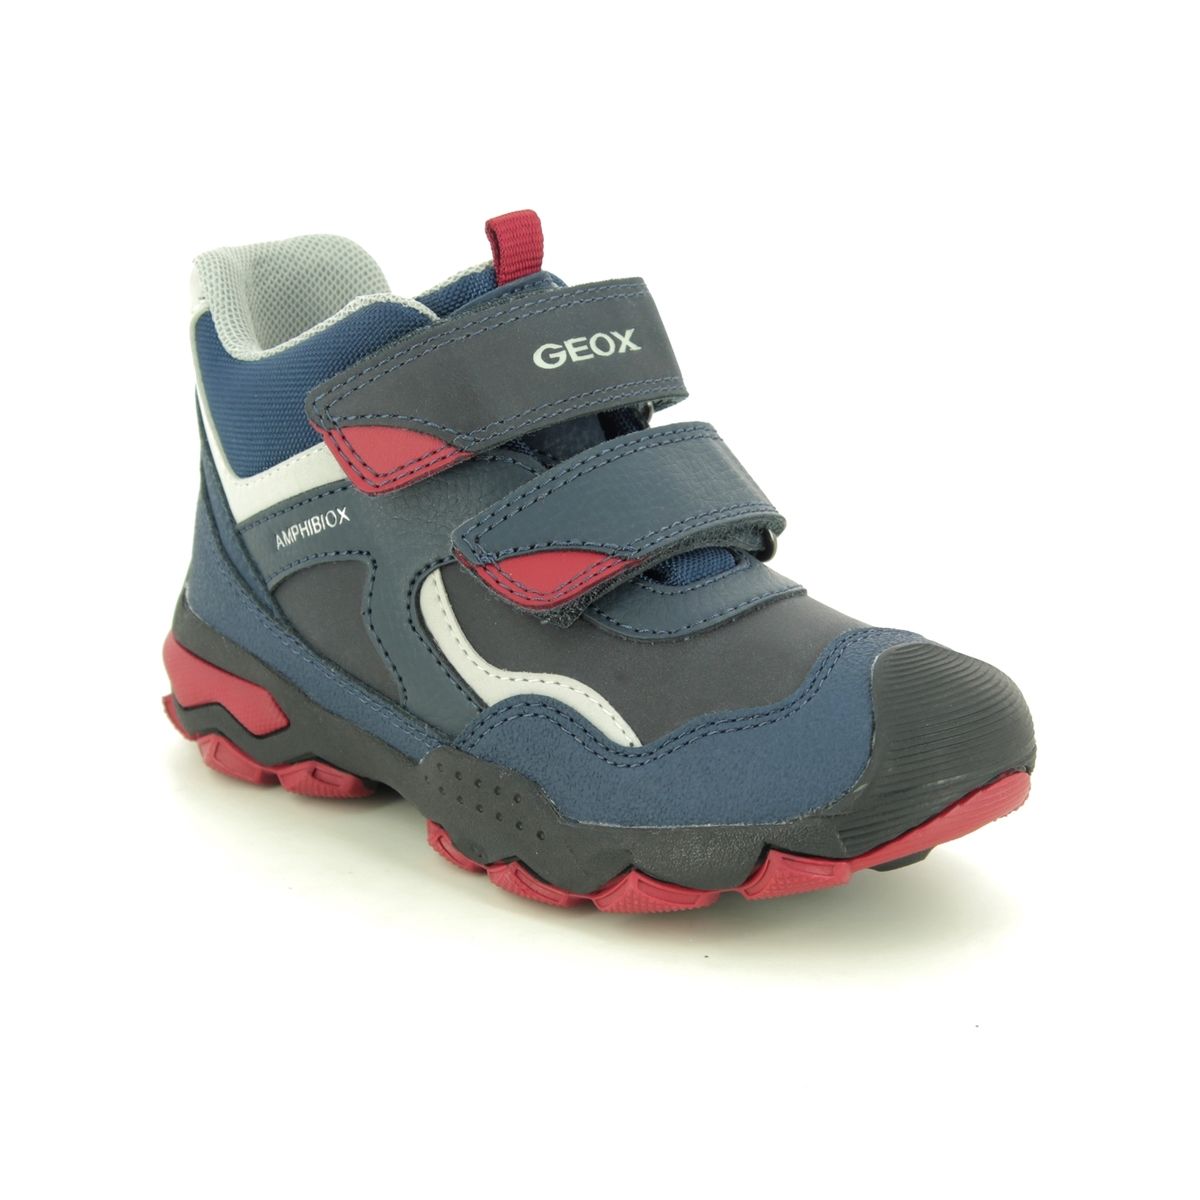 Geox - Buller Boy Tex (Navy Red) J049Wb-C4244 In Size 30 In Plain Navy Red For kids